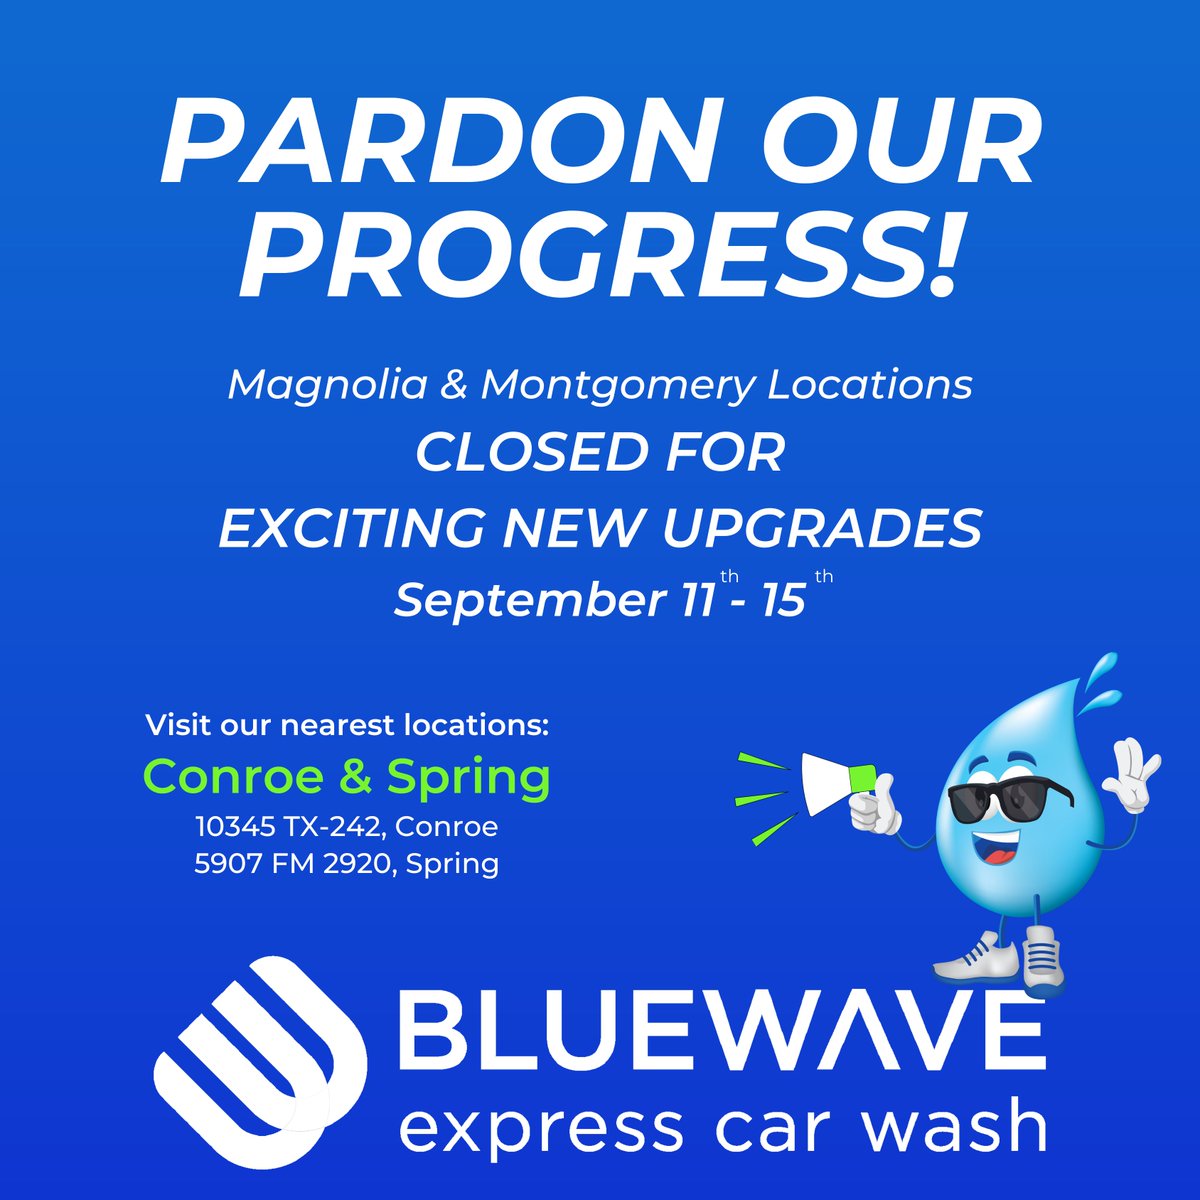 Our #MagnoliaTX and #MontgomeryTX locations will be closed this week for exciting new #upgrades!

Please visit one of our nearest #bluewaveexpress #carwash locations to continue washing without interruptions. 

Thank you for your patience and understanding!